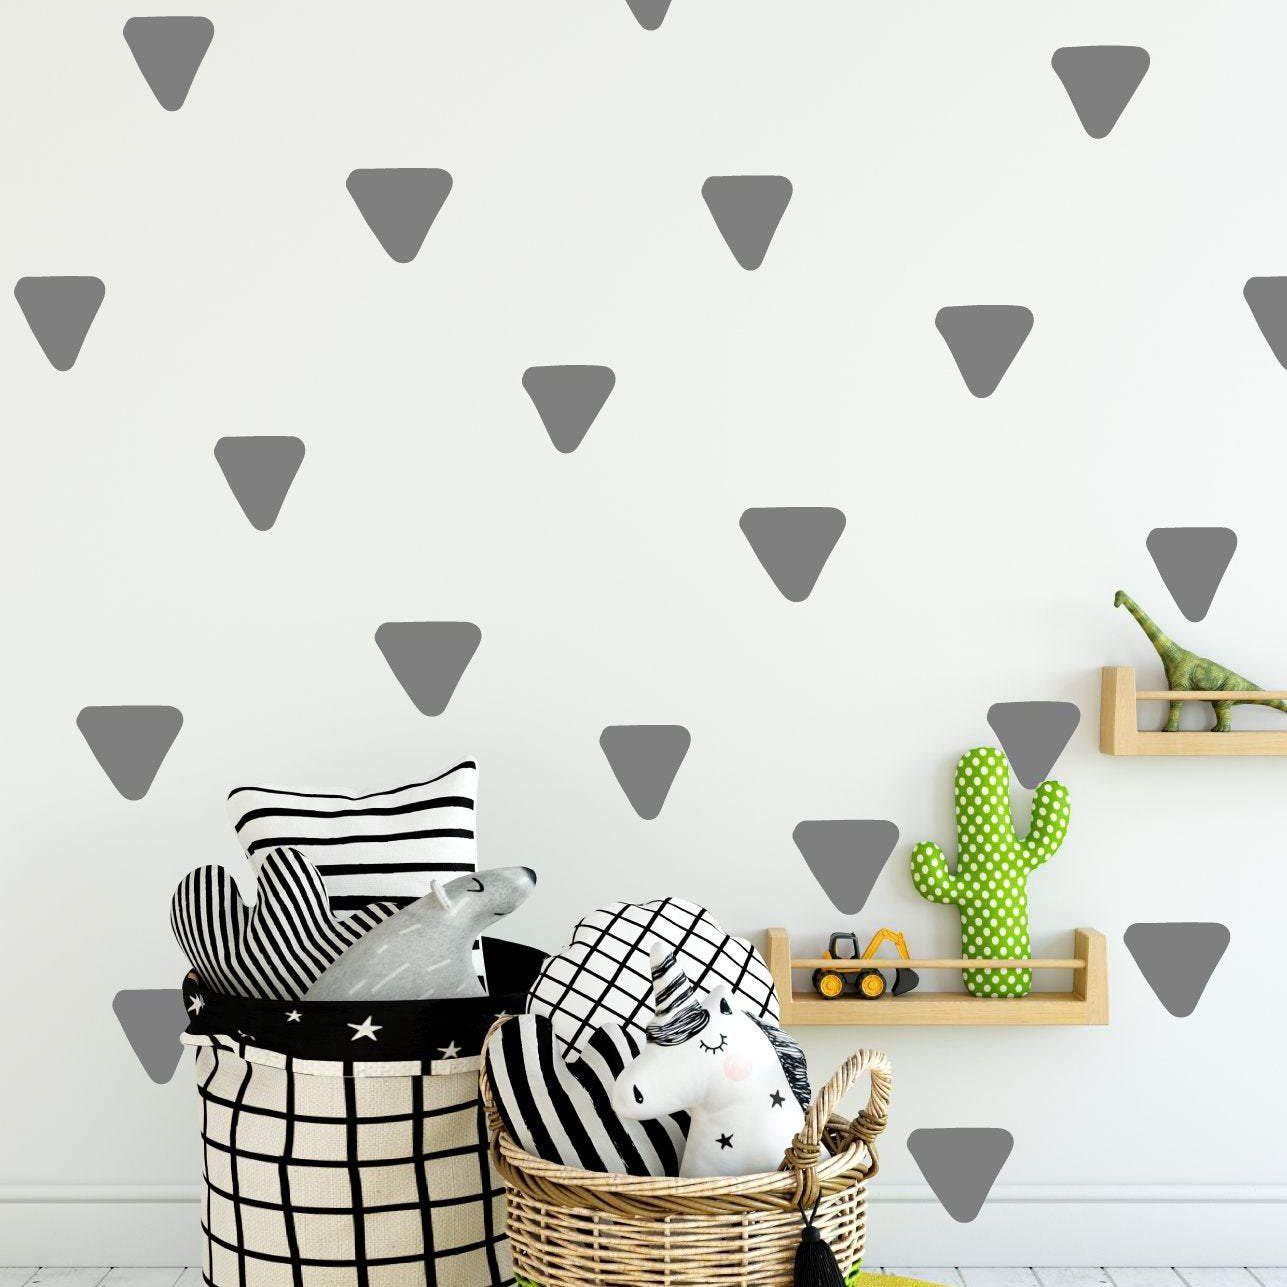 80 Rounded Irregular Triangle Wall Stickers